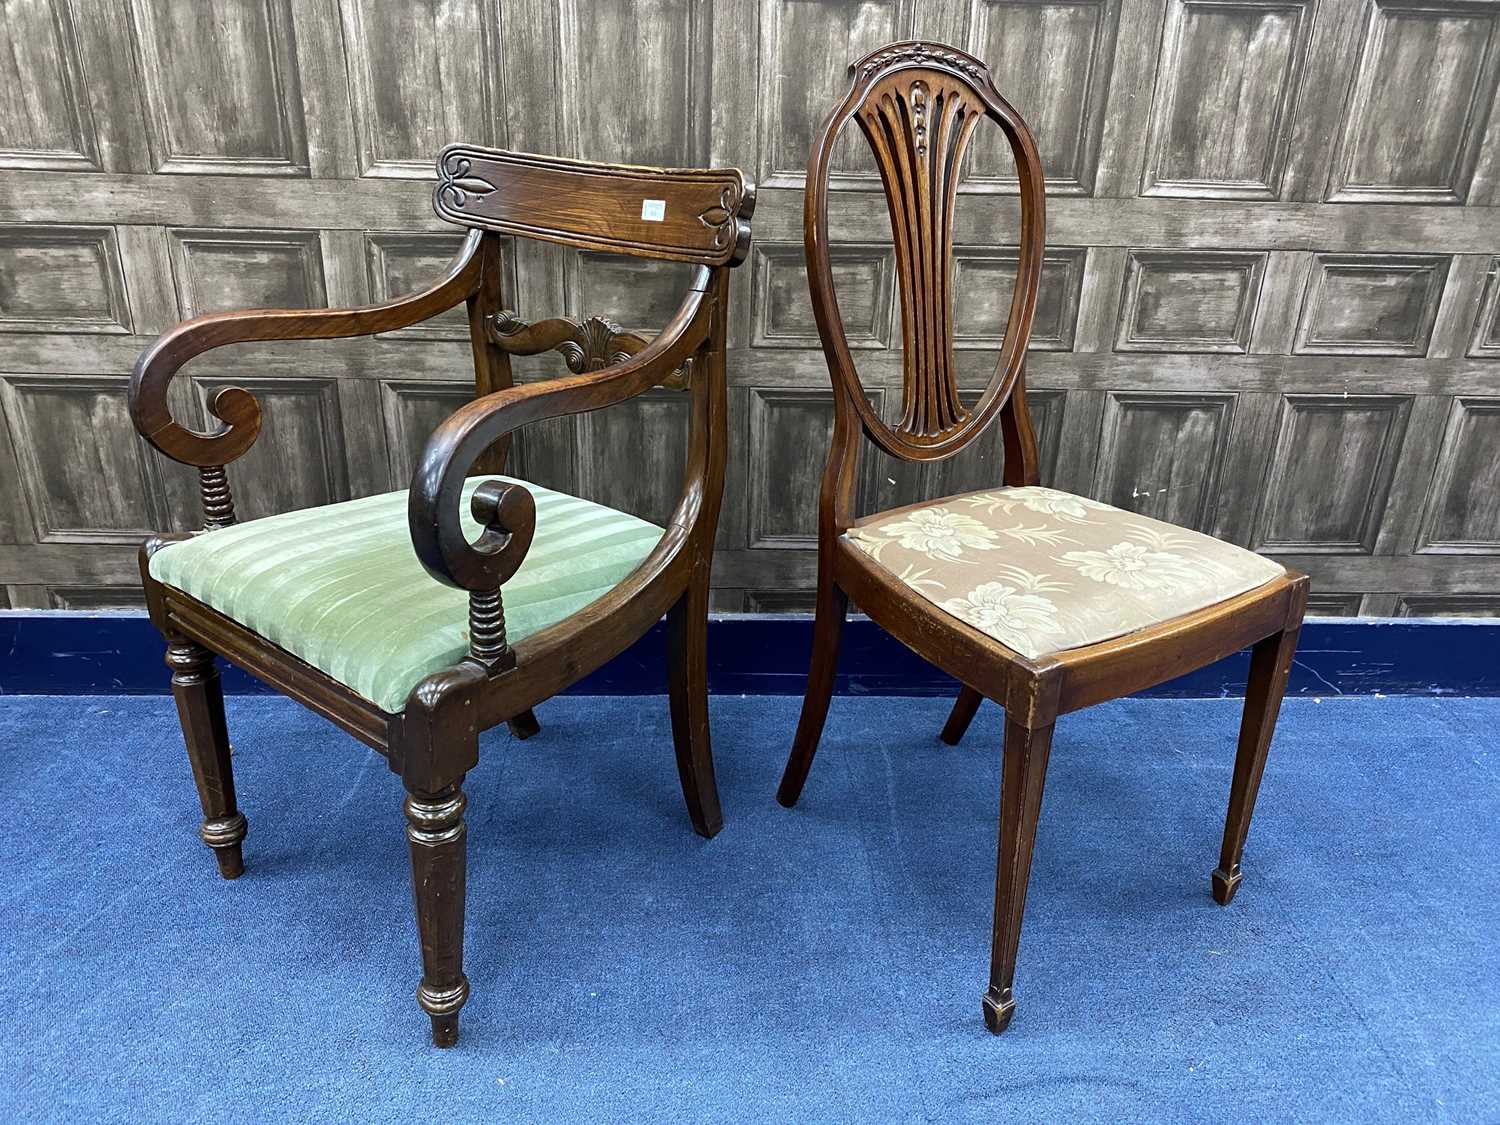 Lot 151 - AN EARLY 19TH CENTURY CARVER CHAIR AND ANOTHER CHAIR